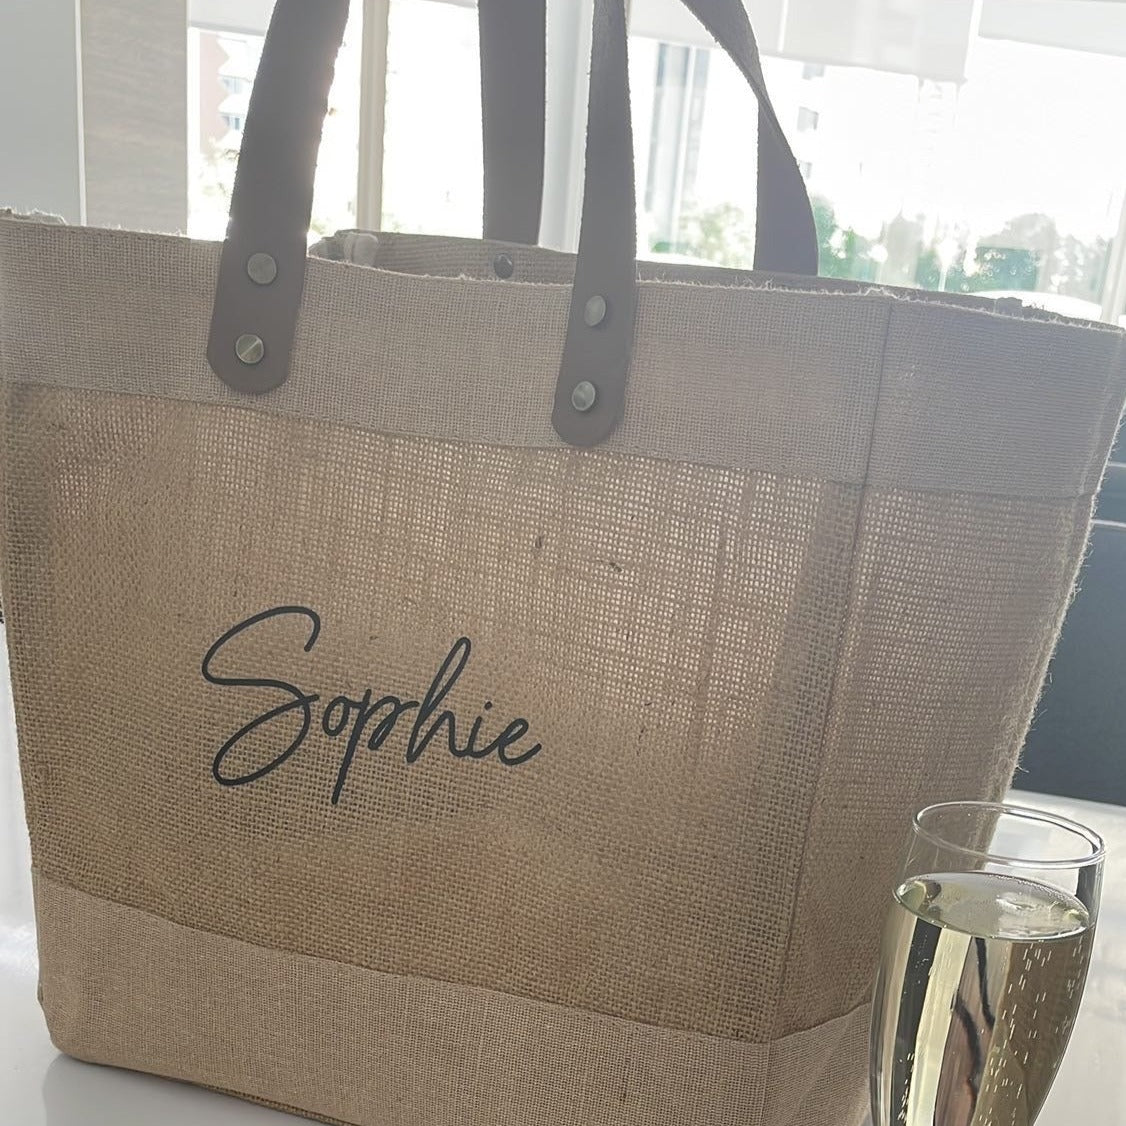 Personalised Small Jute Bag Leather Handle Shopper Beach Bag - OLIVIA AND GRAY LTD